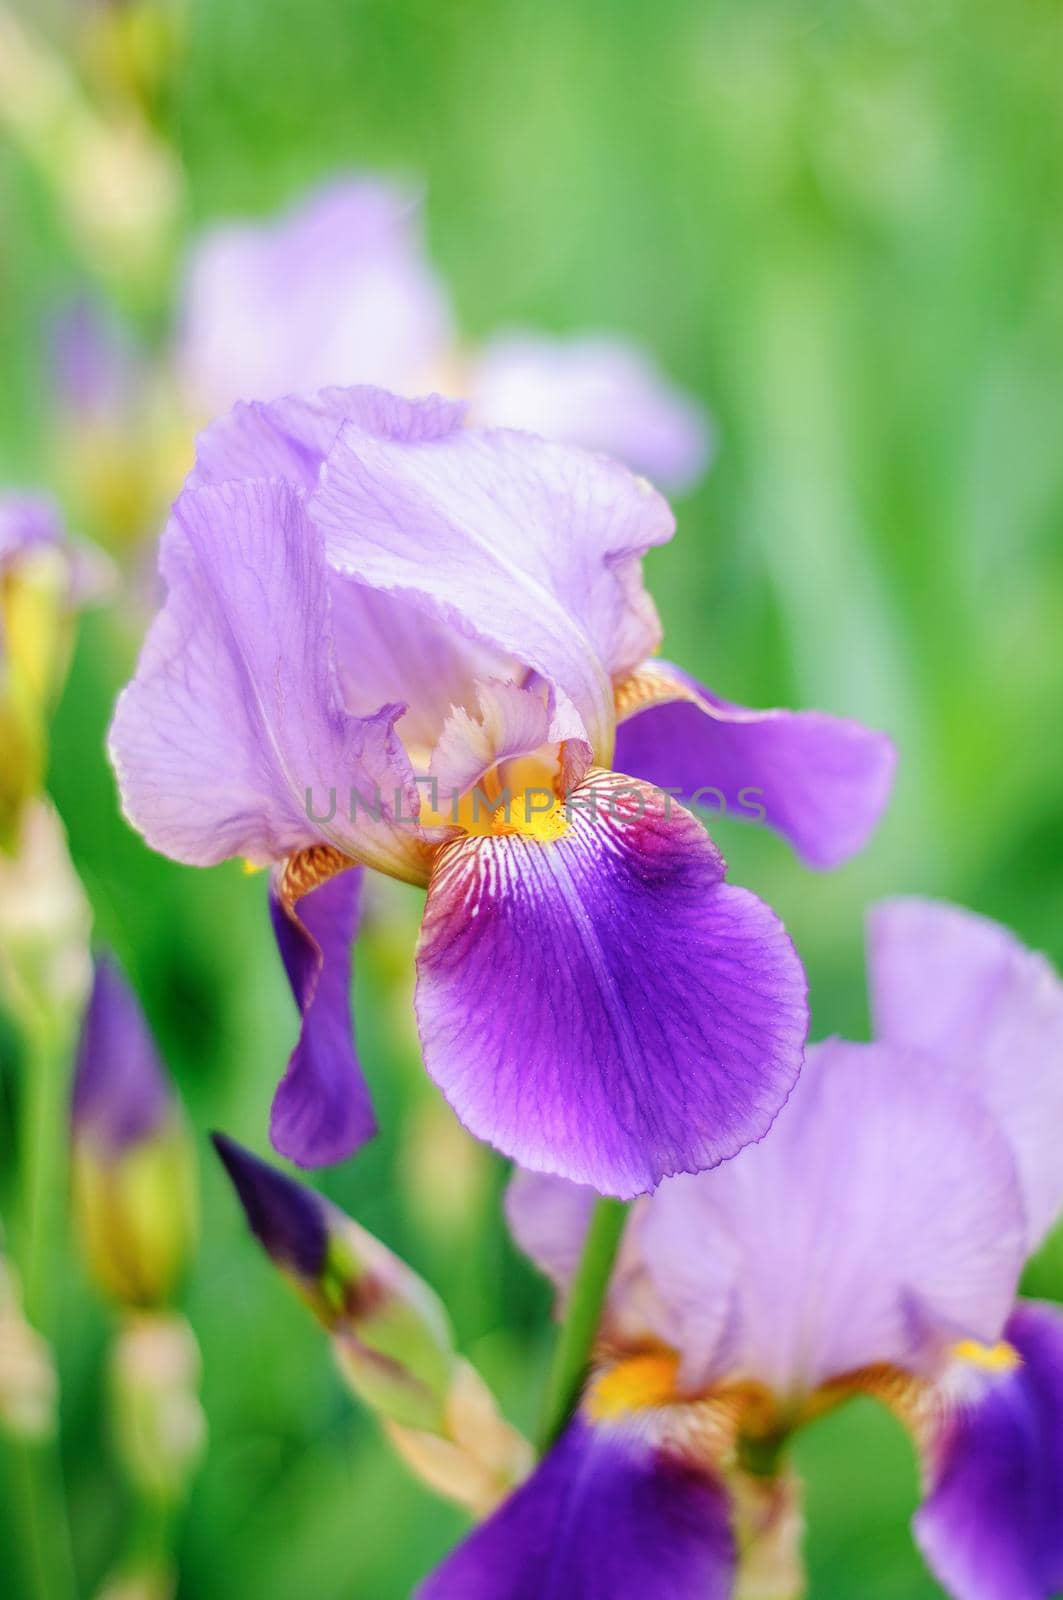 Iris flower macro photo on a green background of nature